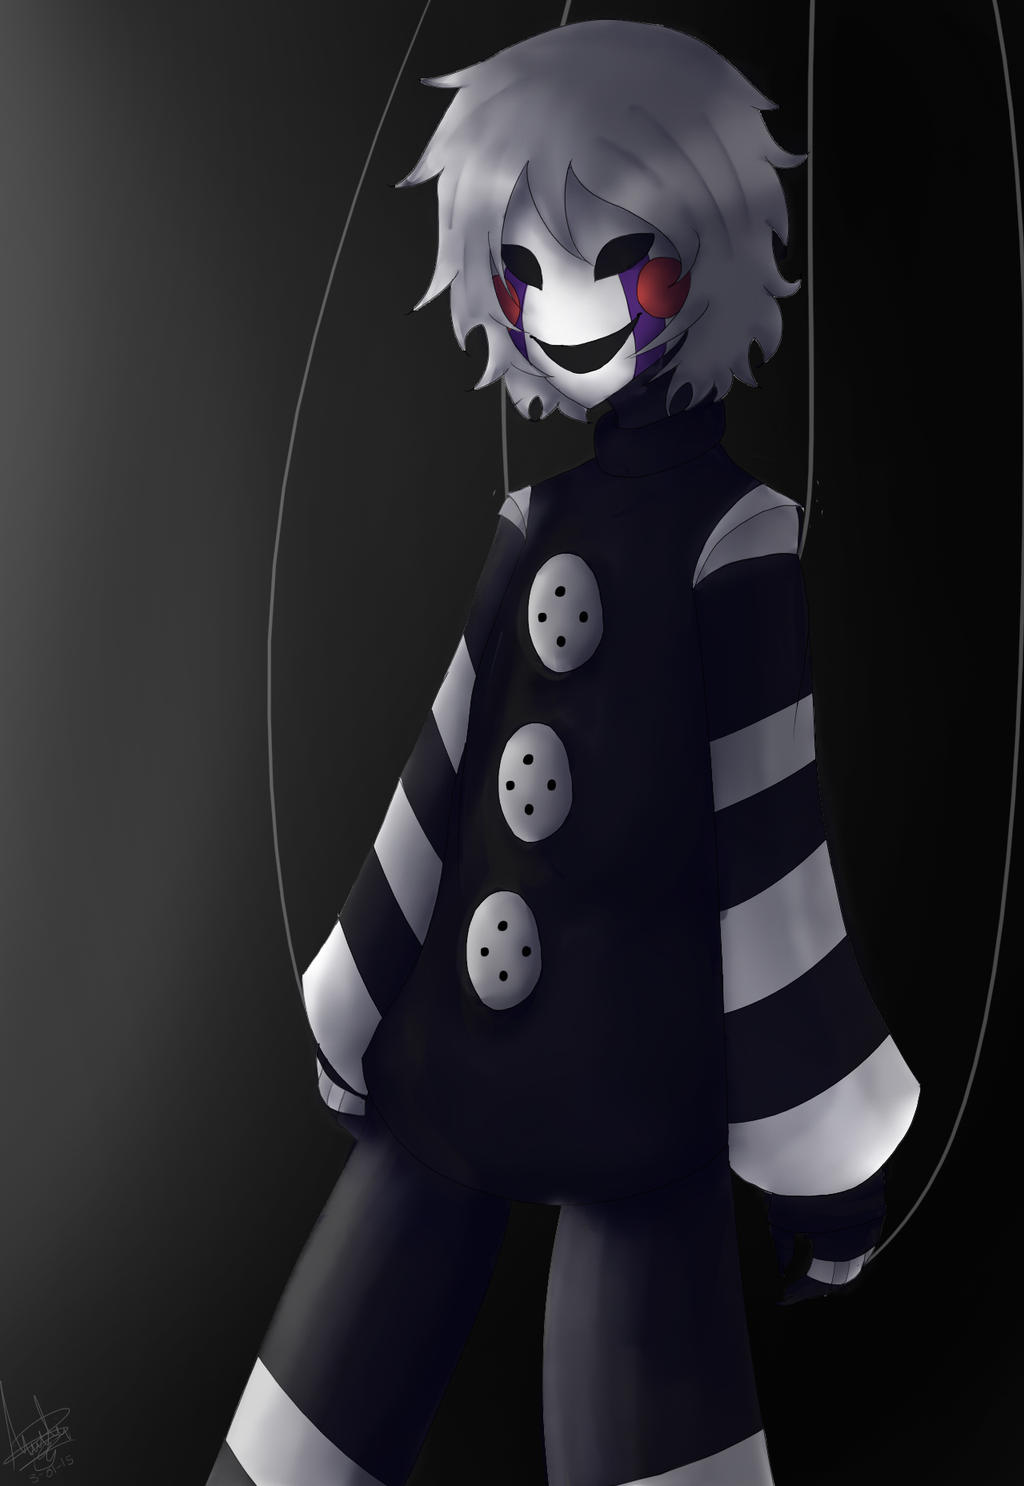 Marionette Fan art Five Nights at Freddy's 2 Anime, submarine